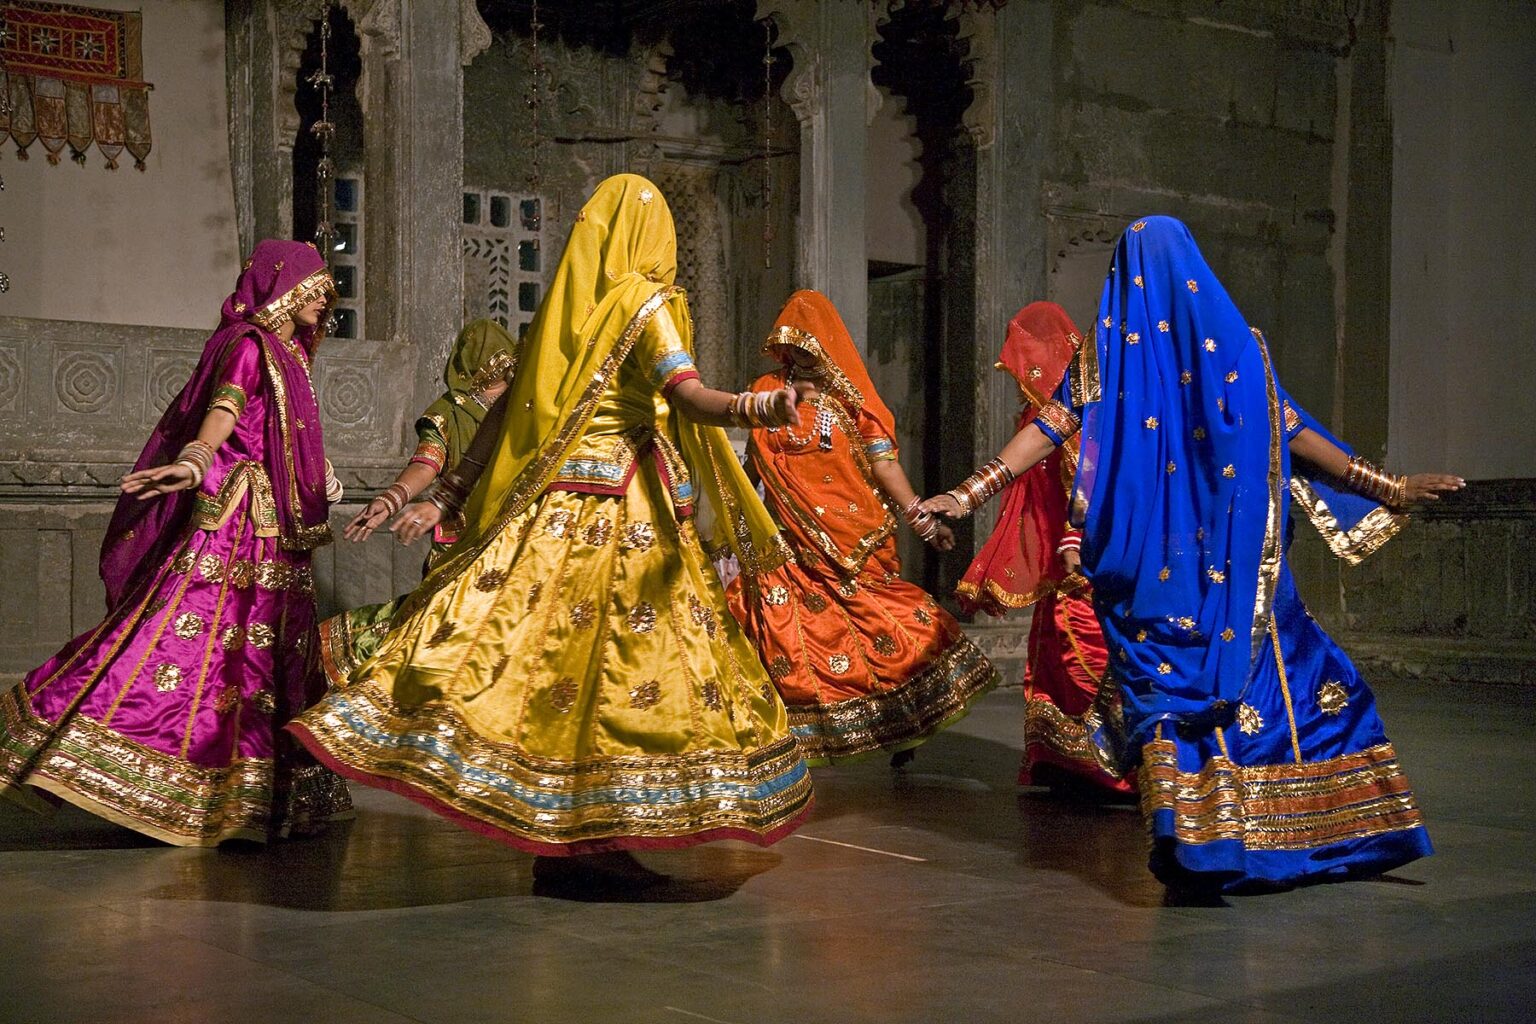 Rajasthani women perform a traditional DANCE in their colorful silk dresses at the BAGORE KI HAVELI in UDAIPUR - RAJASTHAN, INDIA